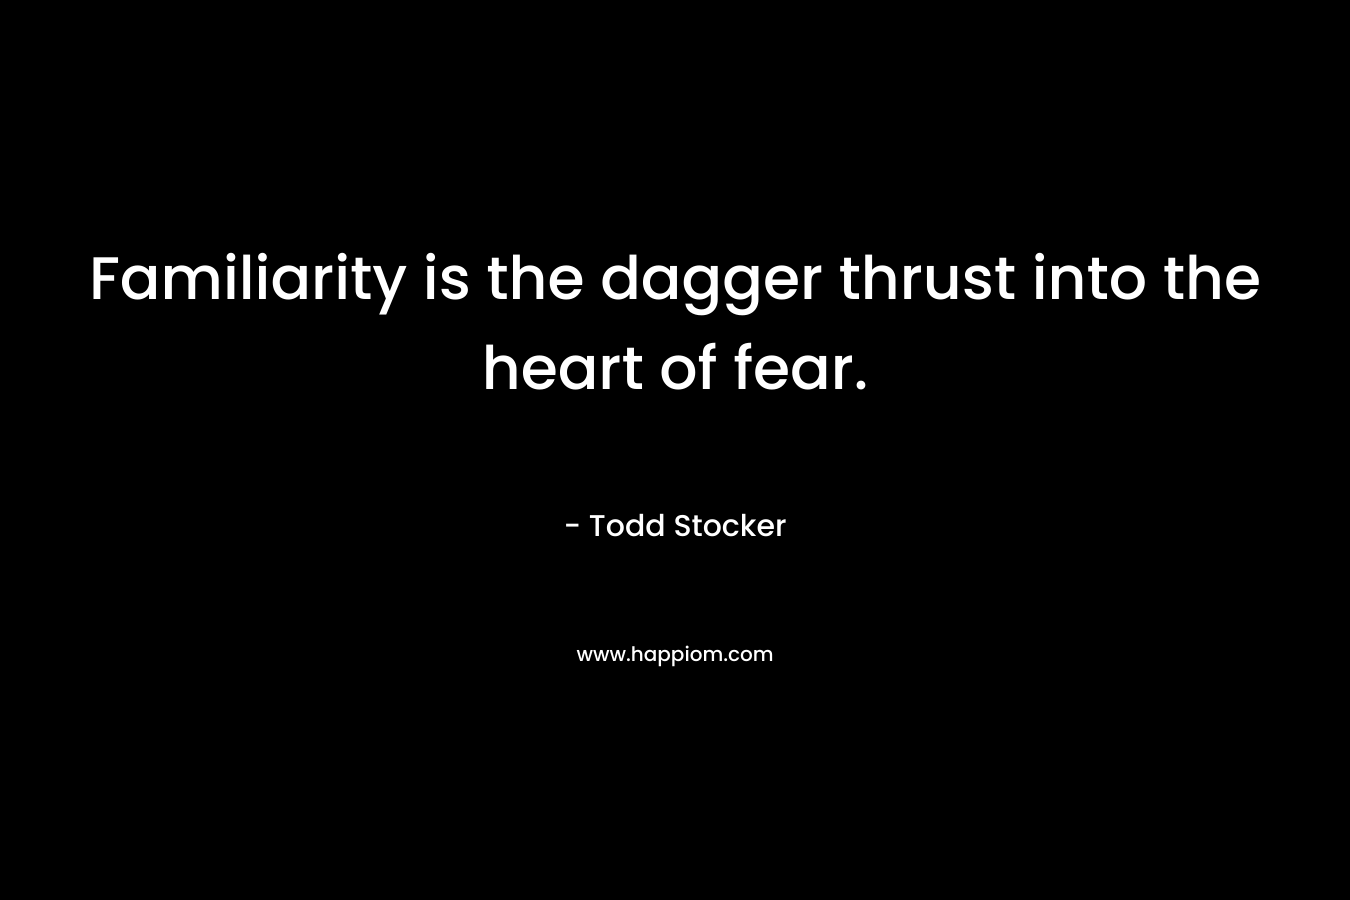 Familiarity is the dagger thrust into the heart of fear. – Todd Stocker